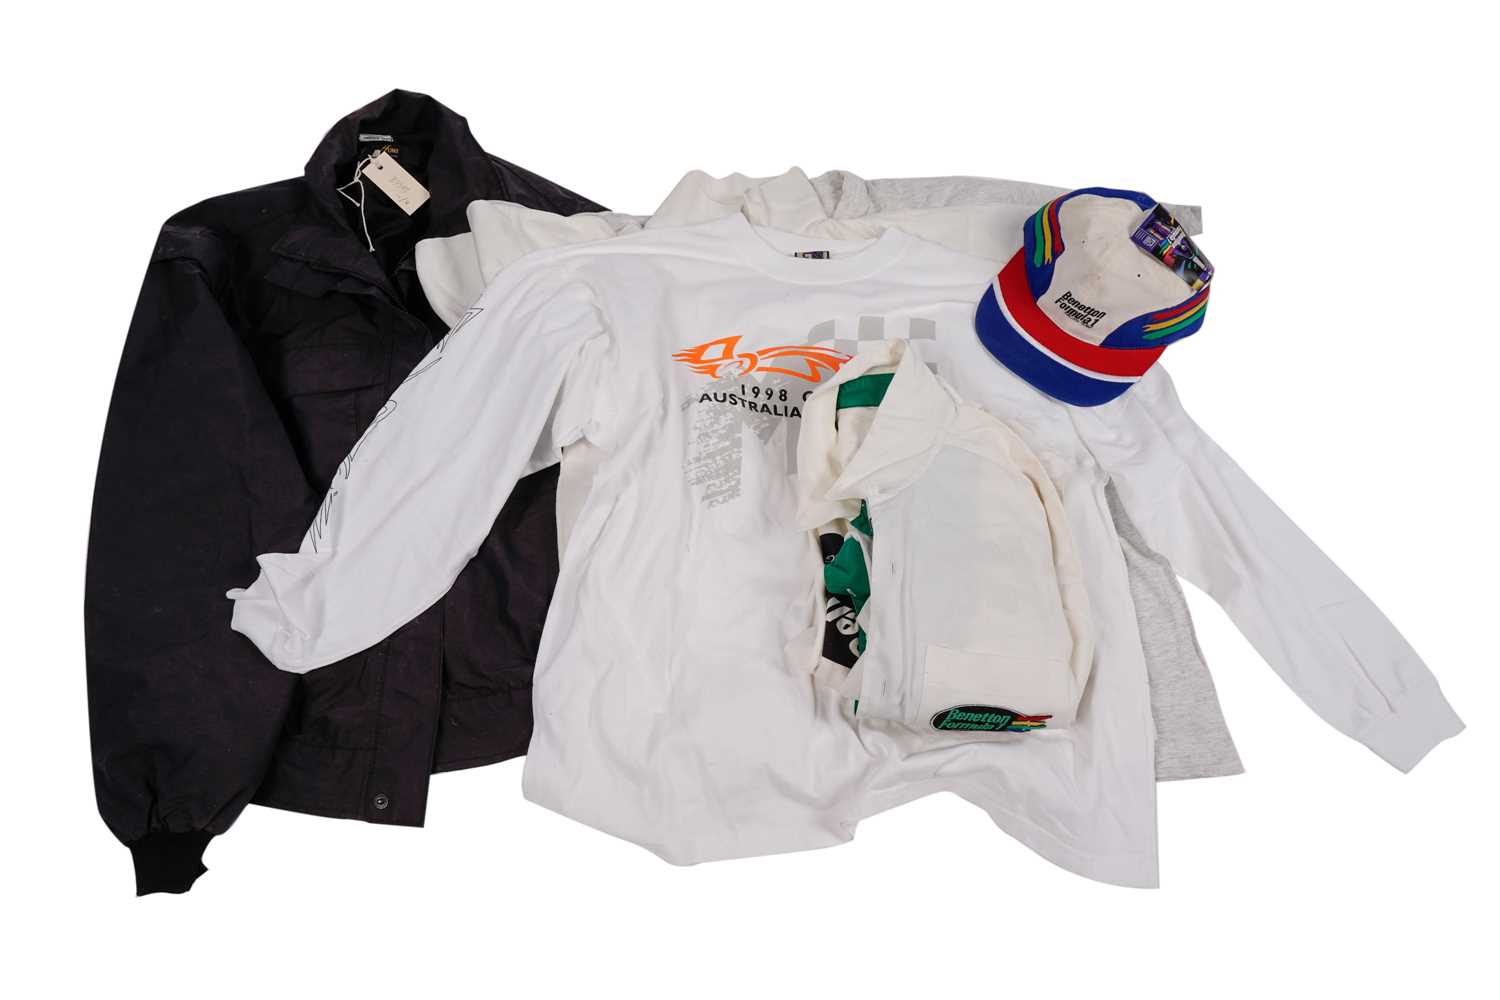 Lot 739 - A collection of F1 Formula One Motorsports clothing